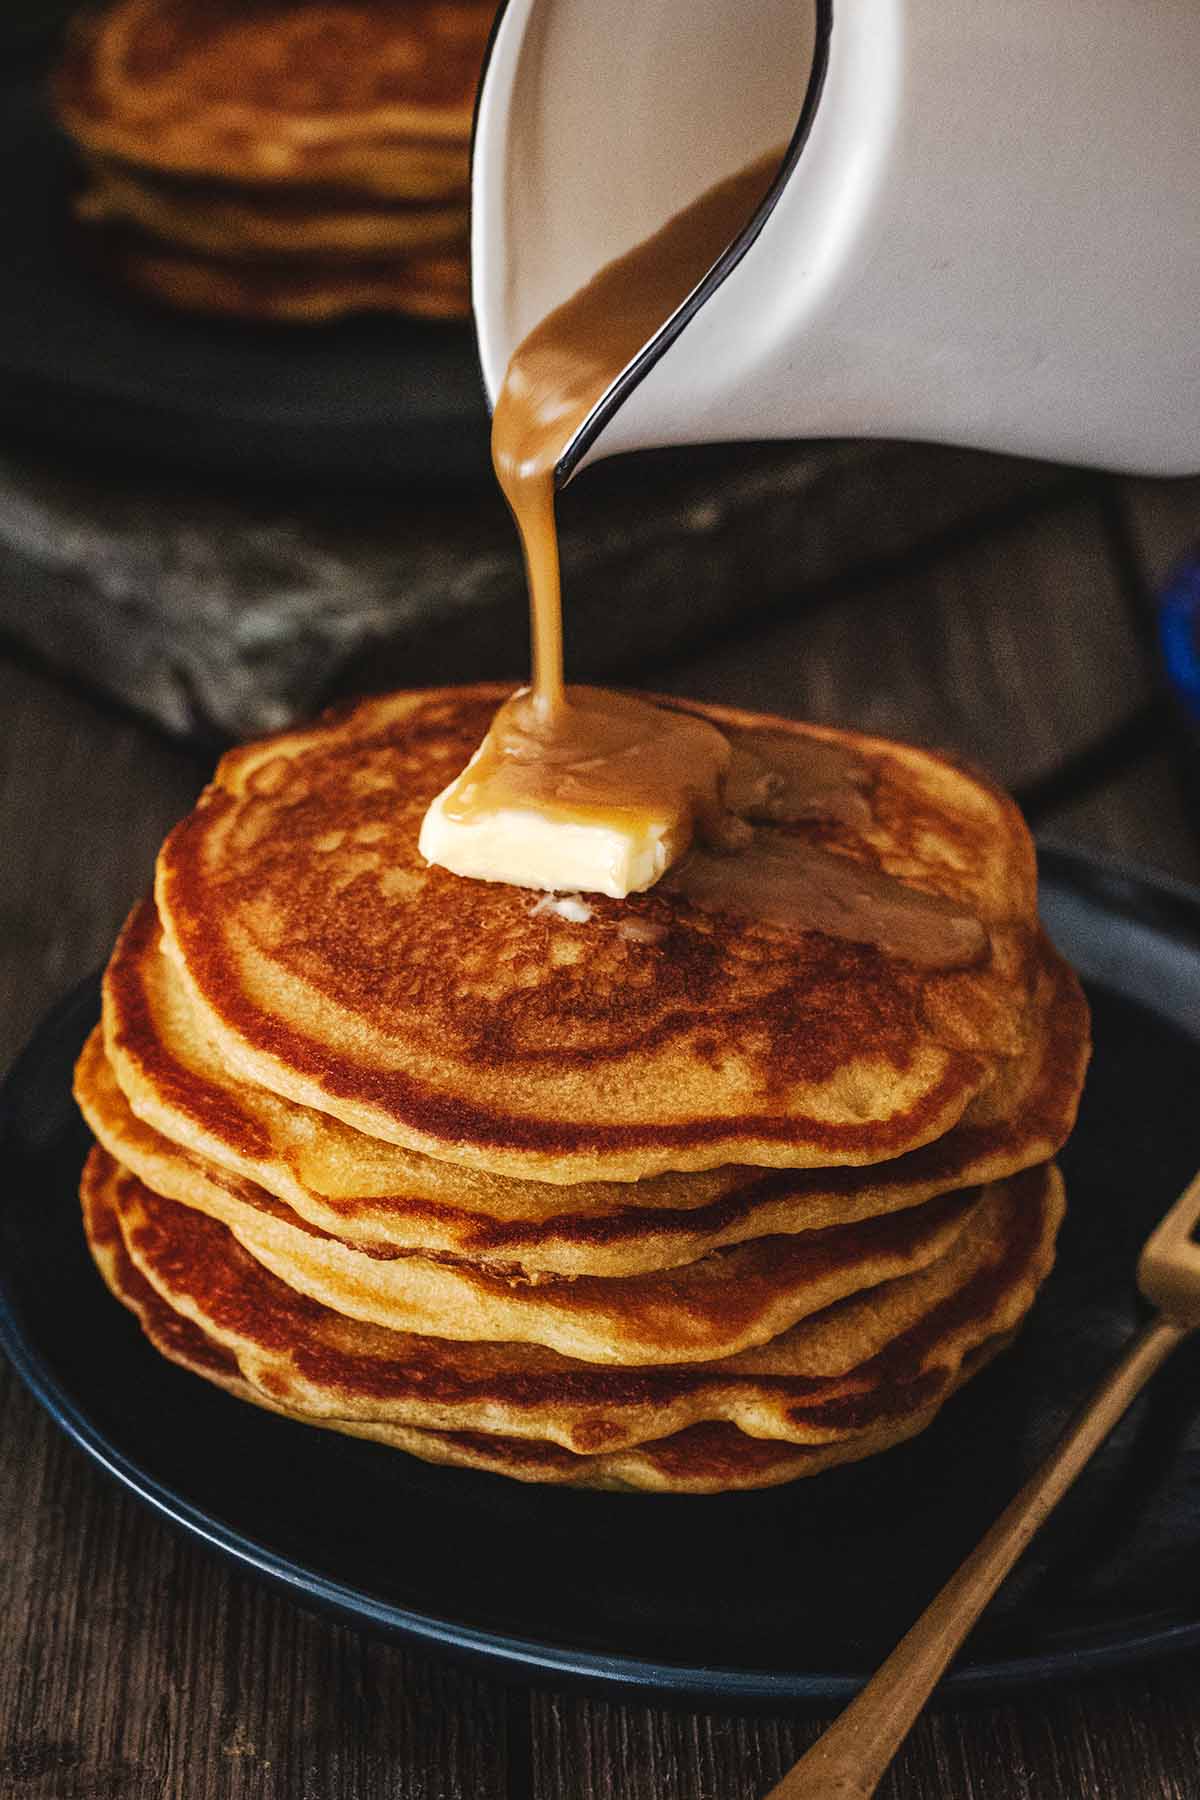 Butterscotch sauce being poured on a stack of butterscotch pancakes